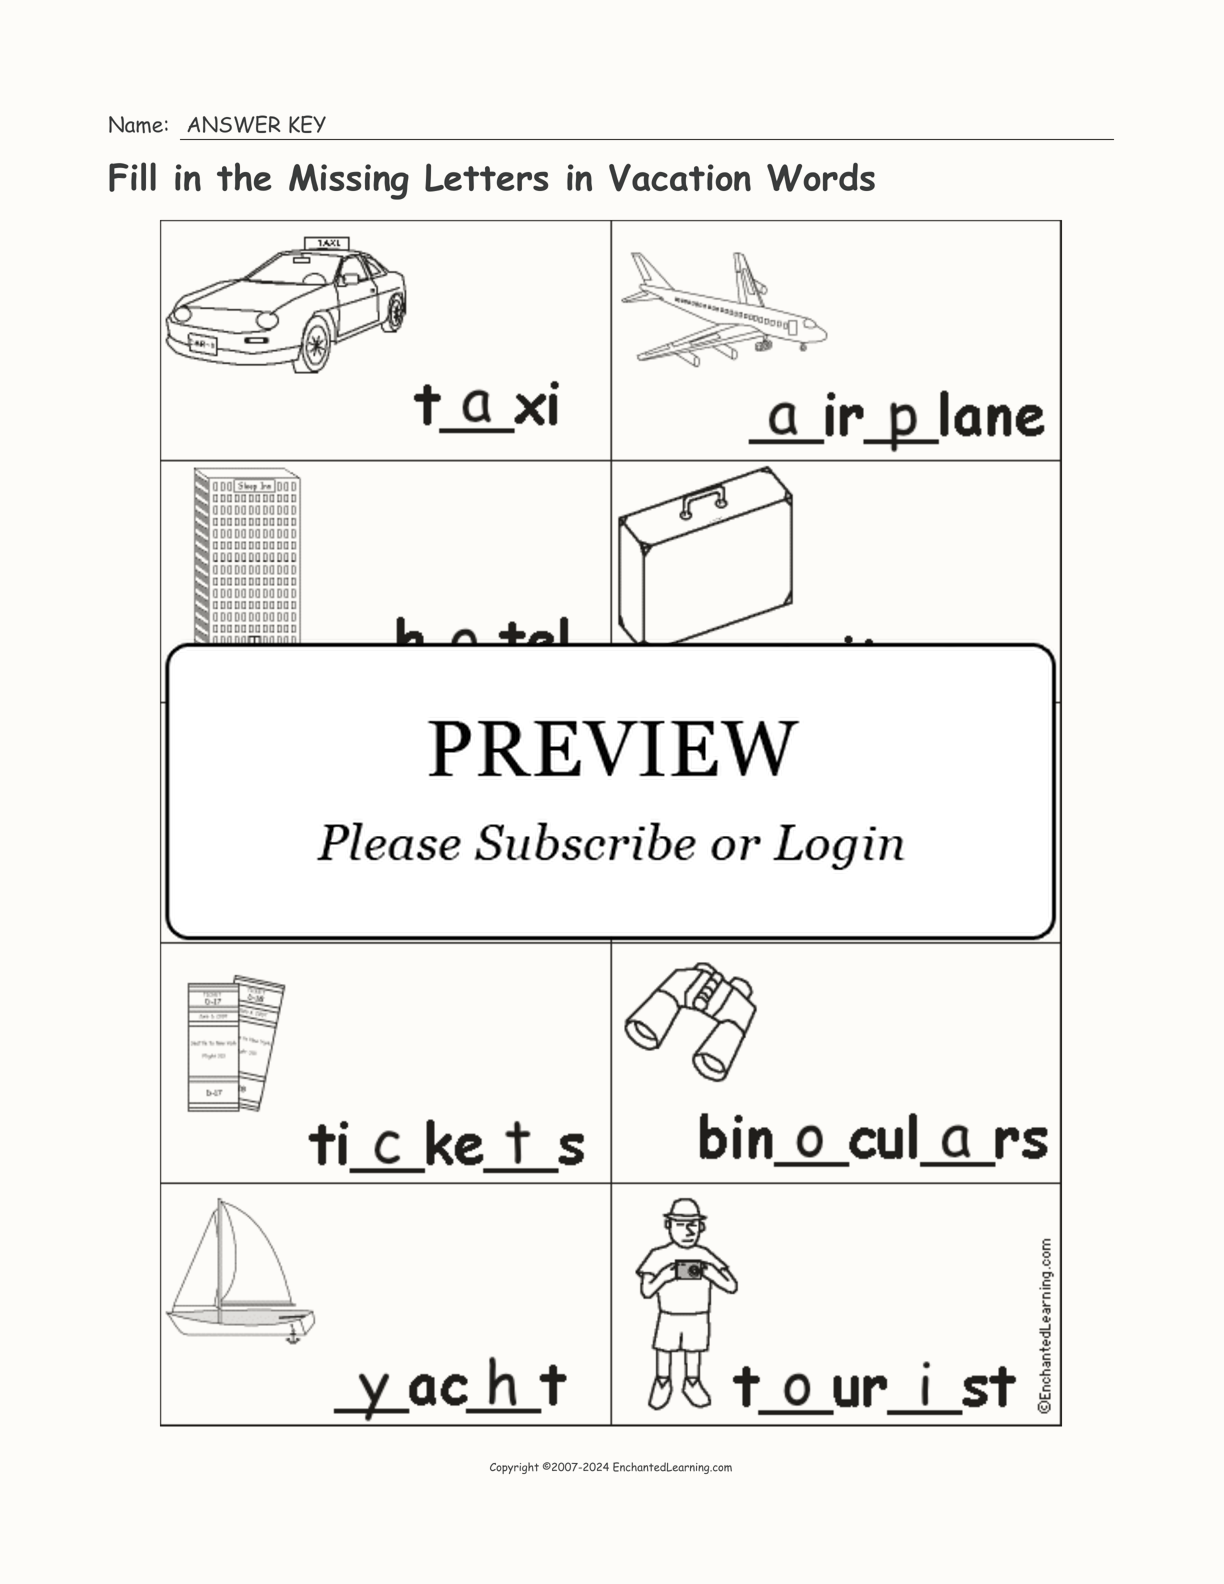 Fill in the Missing Letters in Vacation Words interactive worksheet page 2